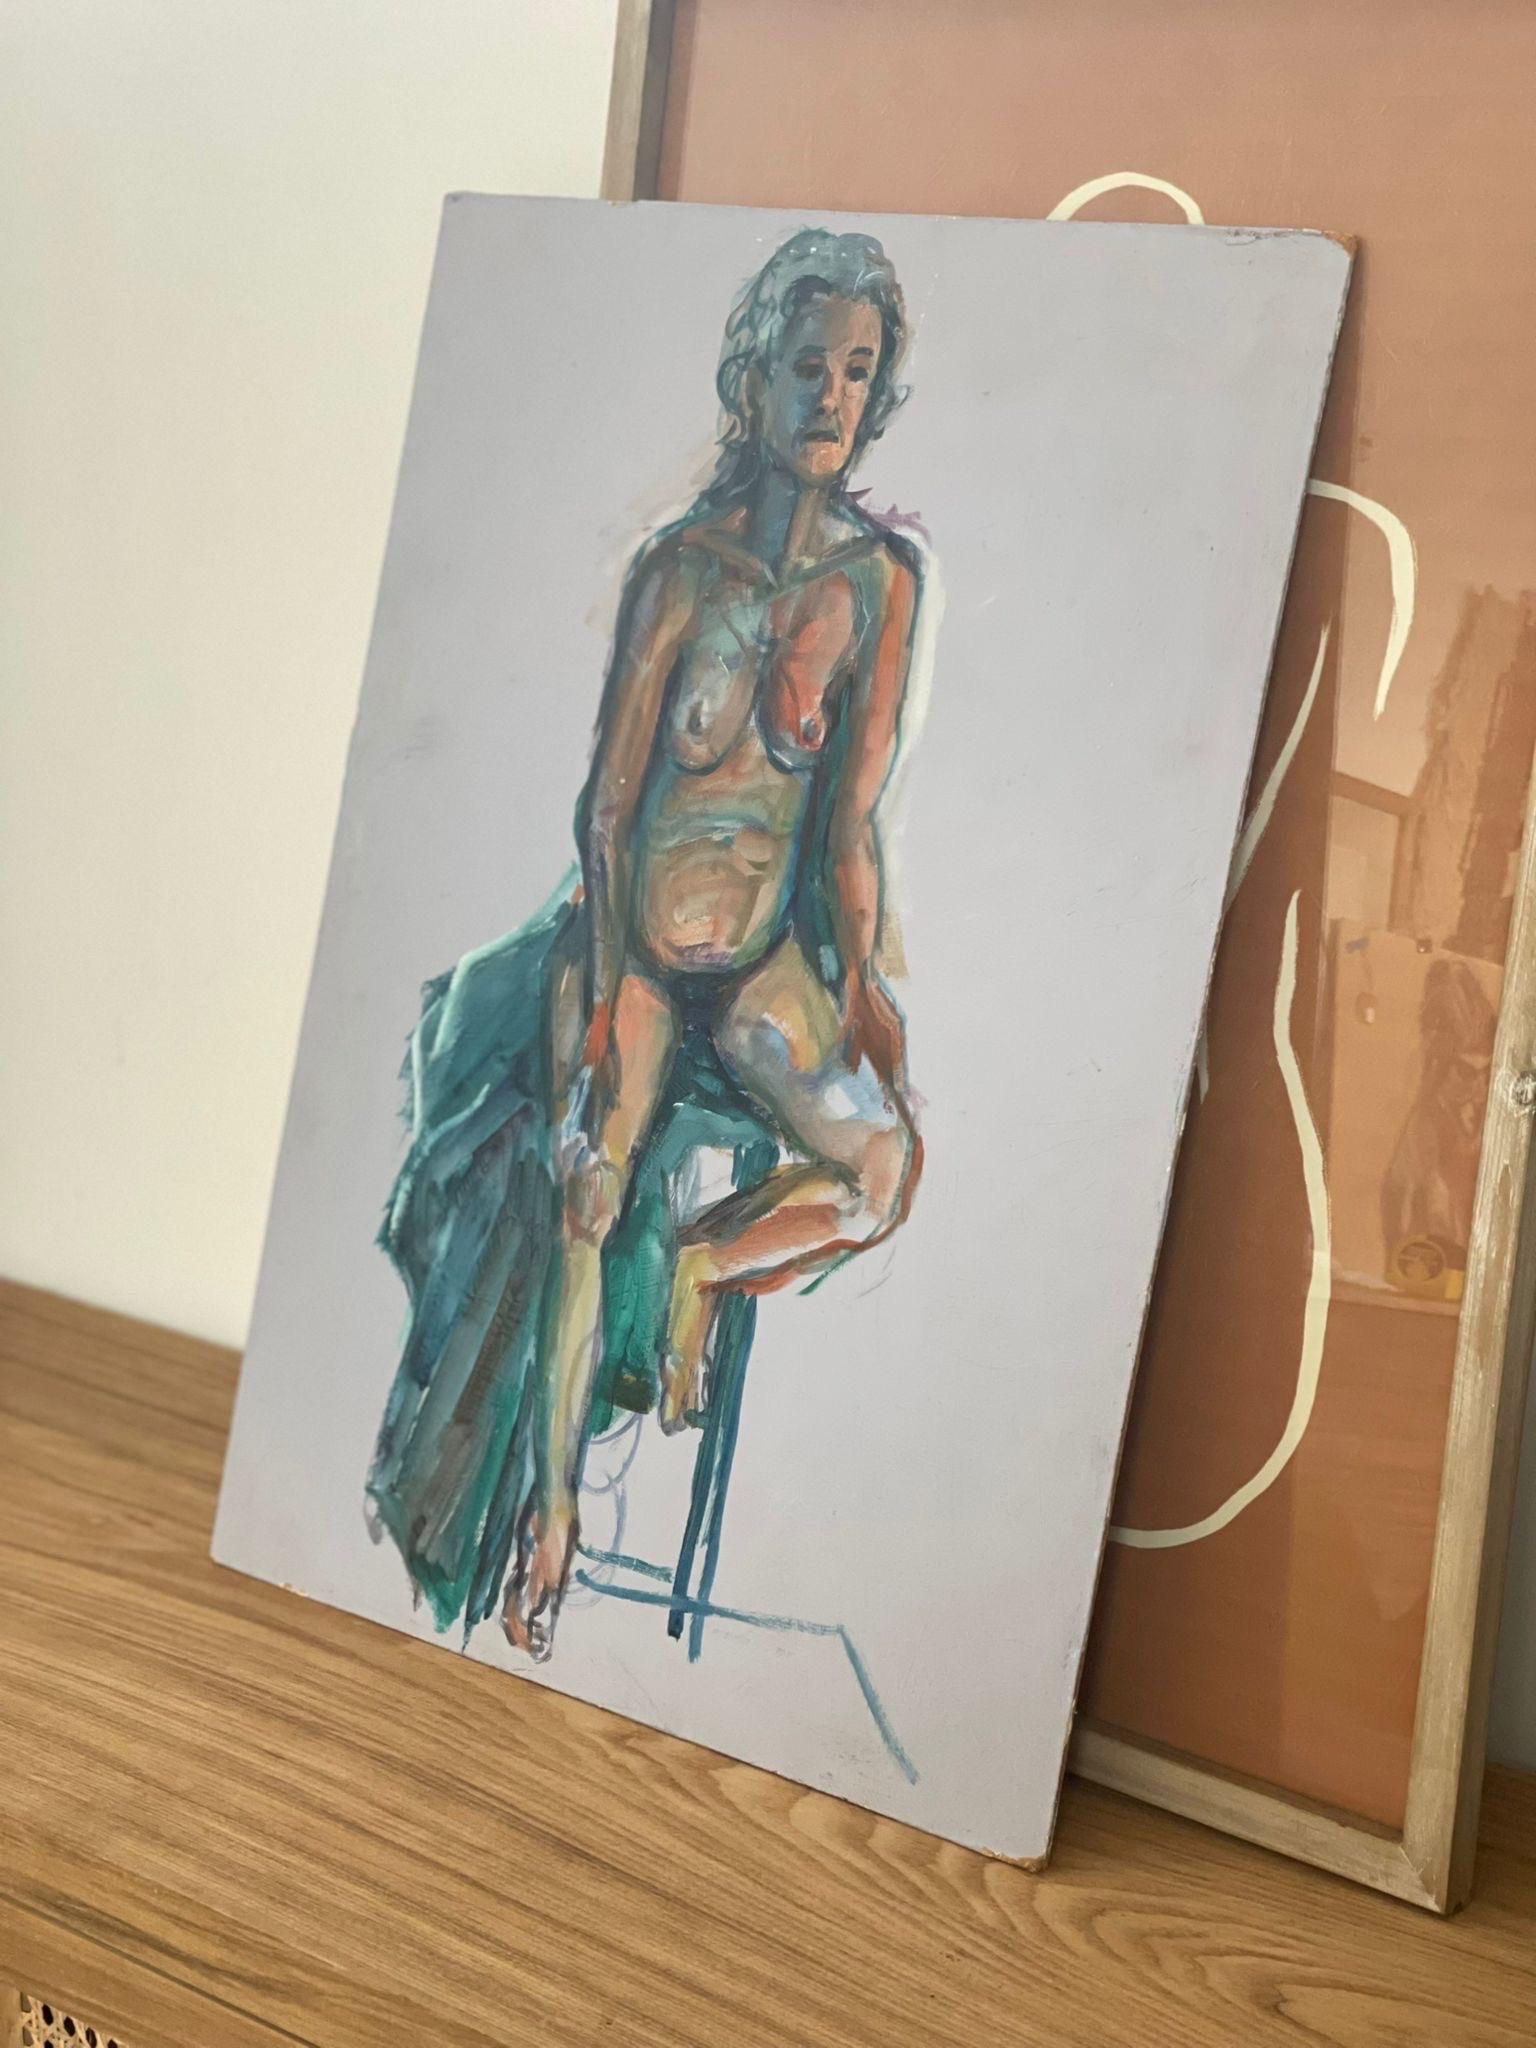 Vintage Abstract Nude Woman Figure Drawing on Board Possibly Pastel Retro broad strokes unique unsigned artwork handmade

Dimensions. 18 W ; 0.25 D ; 24 H